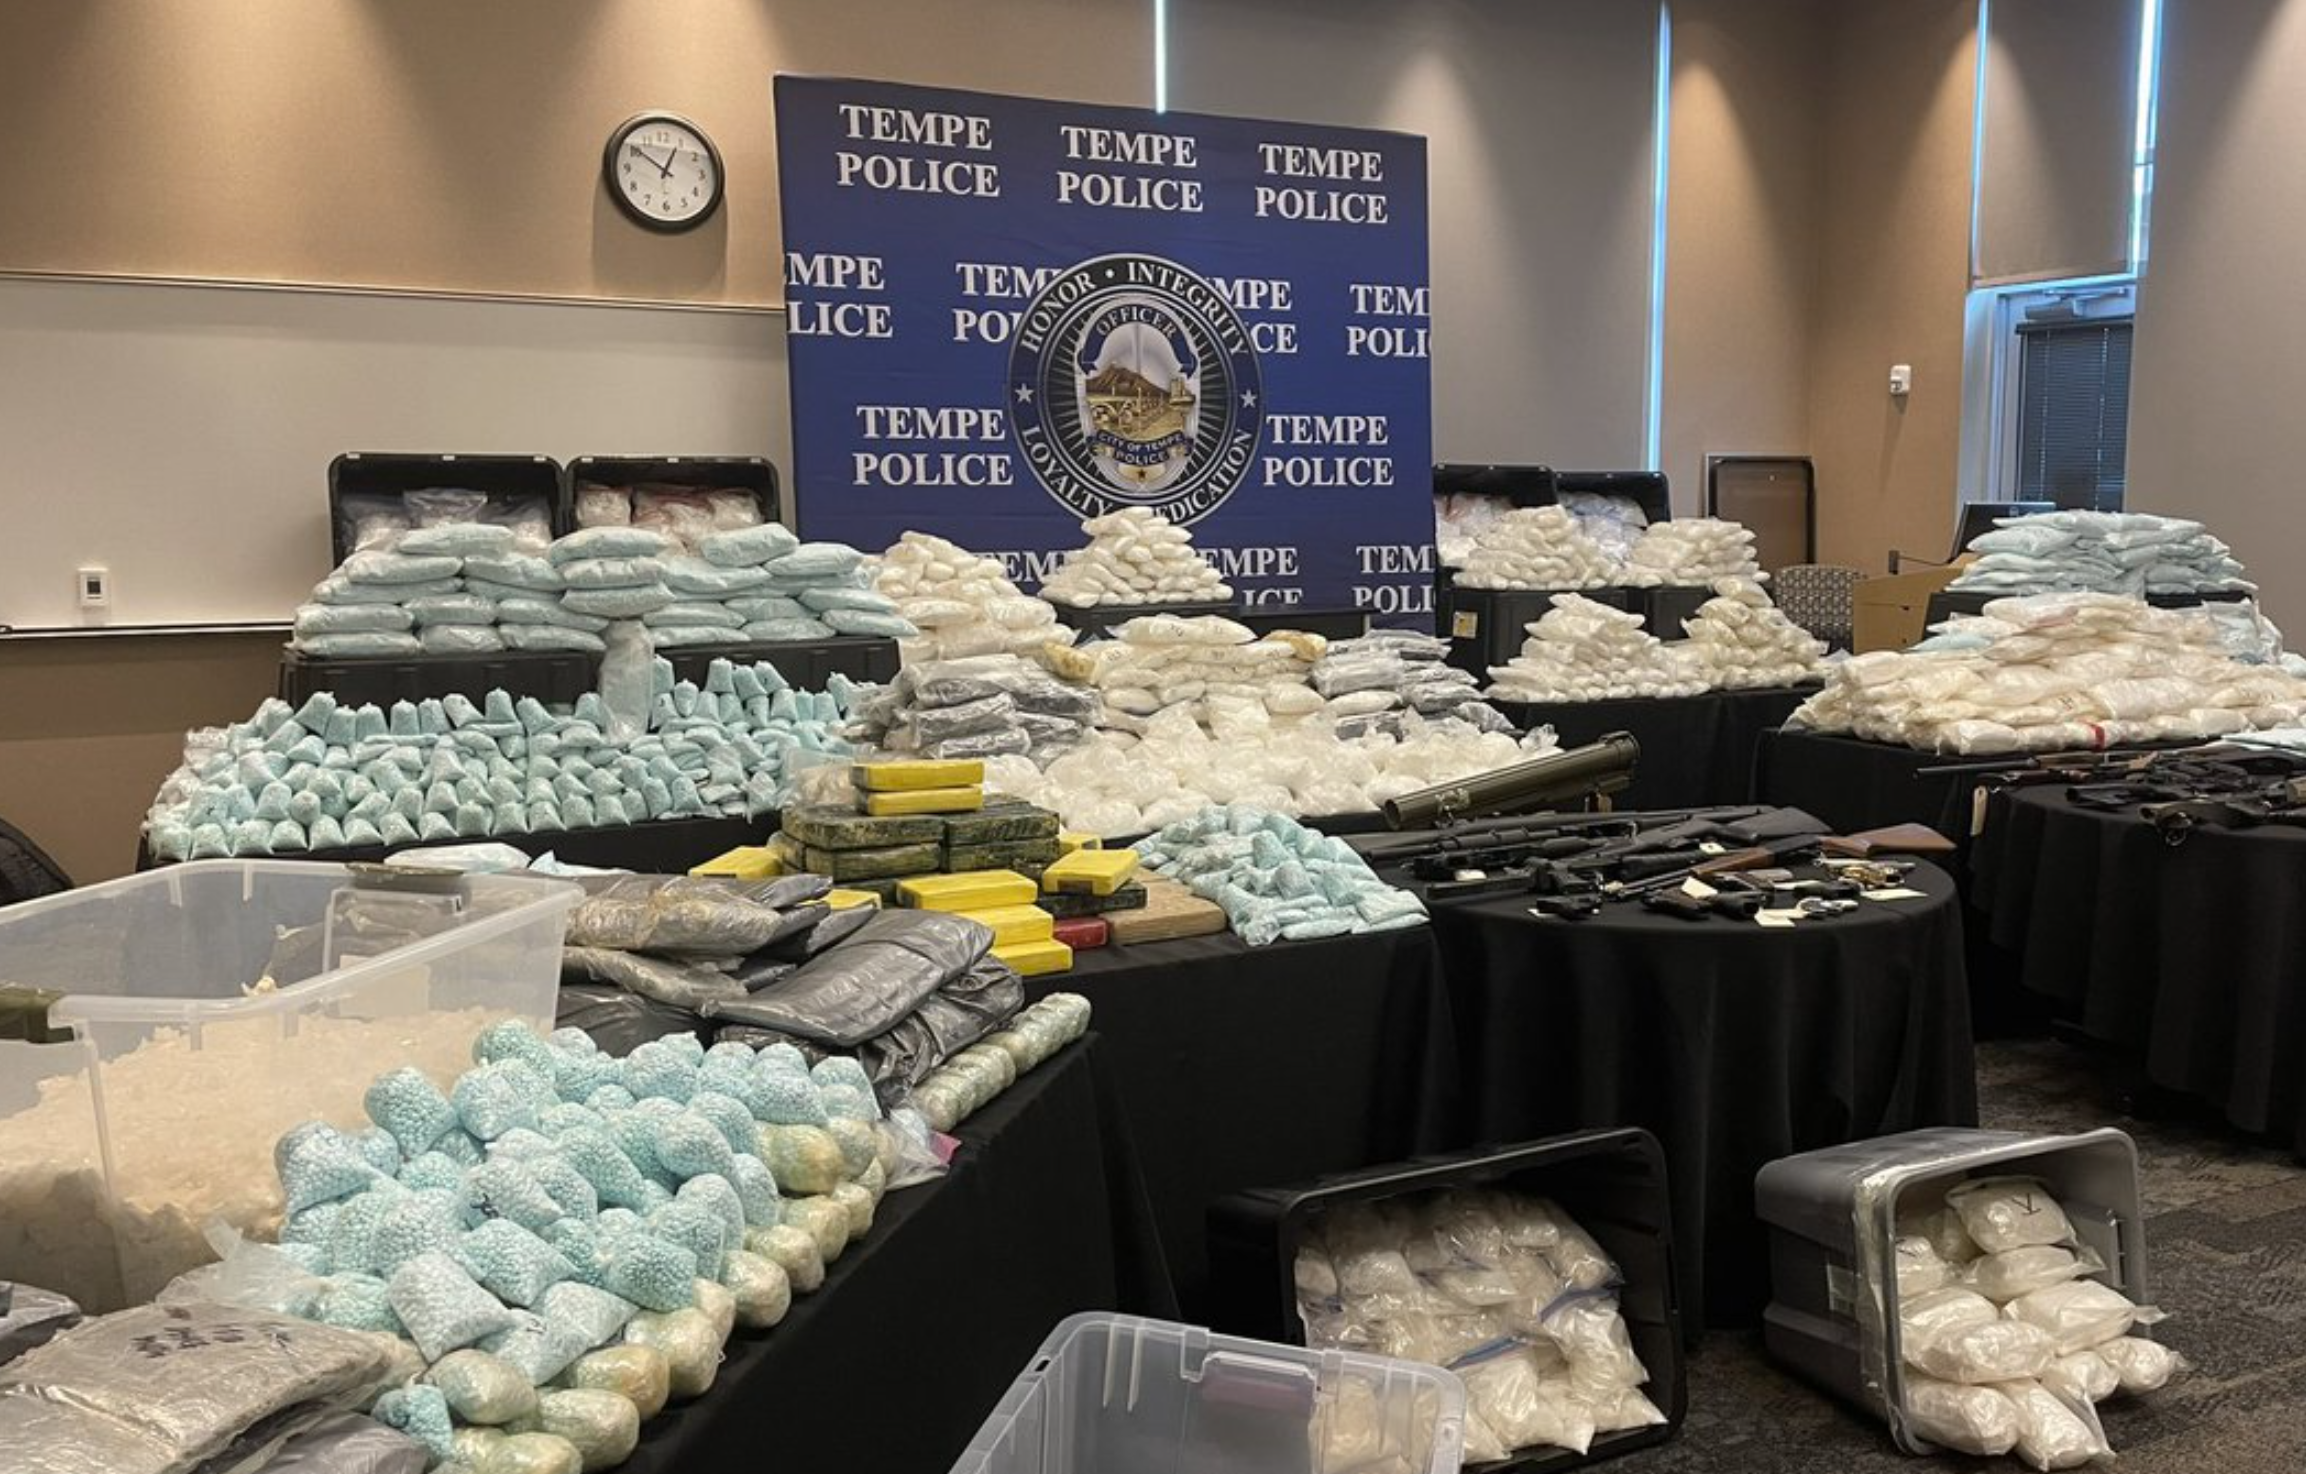 Many, many tables displaying bags of narcotics with a Tempe Police sign behind them